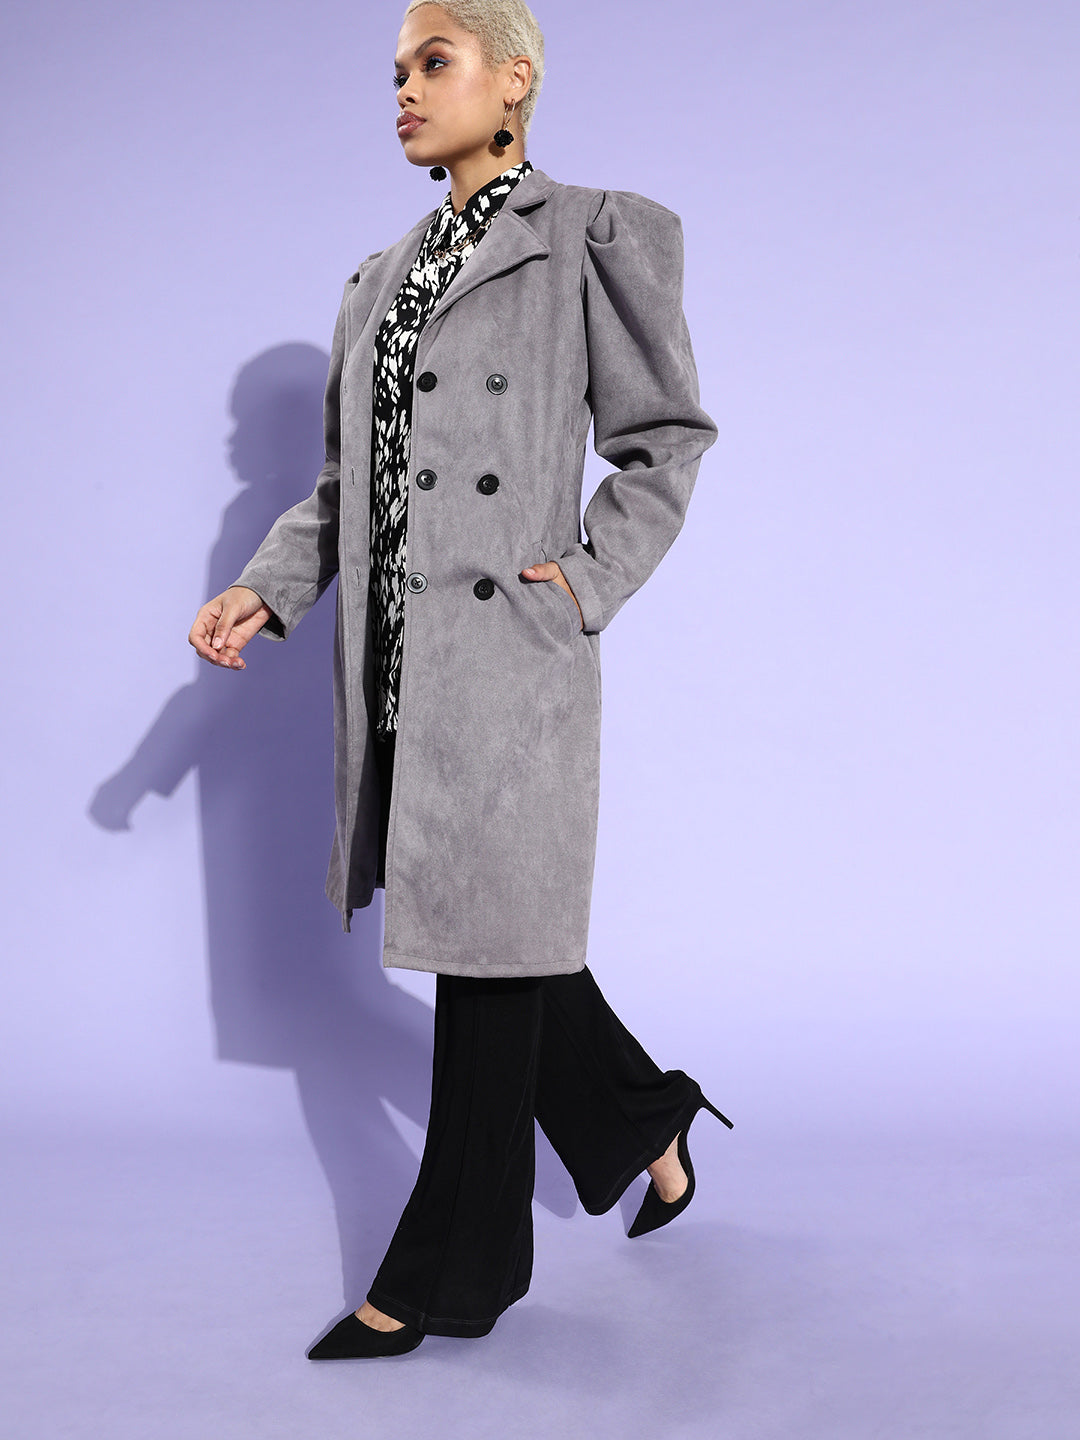 Athena Grey Trench coat with puff sleeves and pocket details - Athena Lifestyle